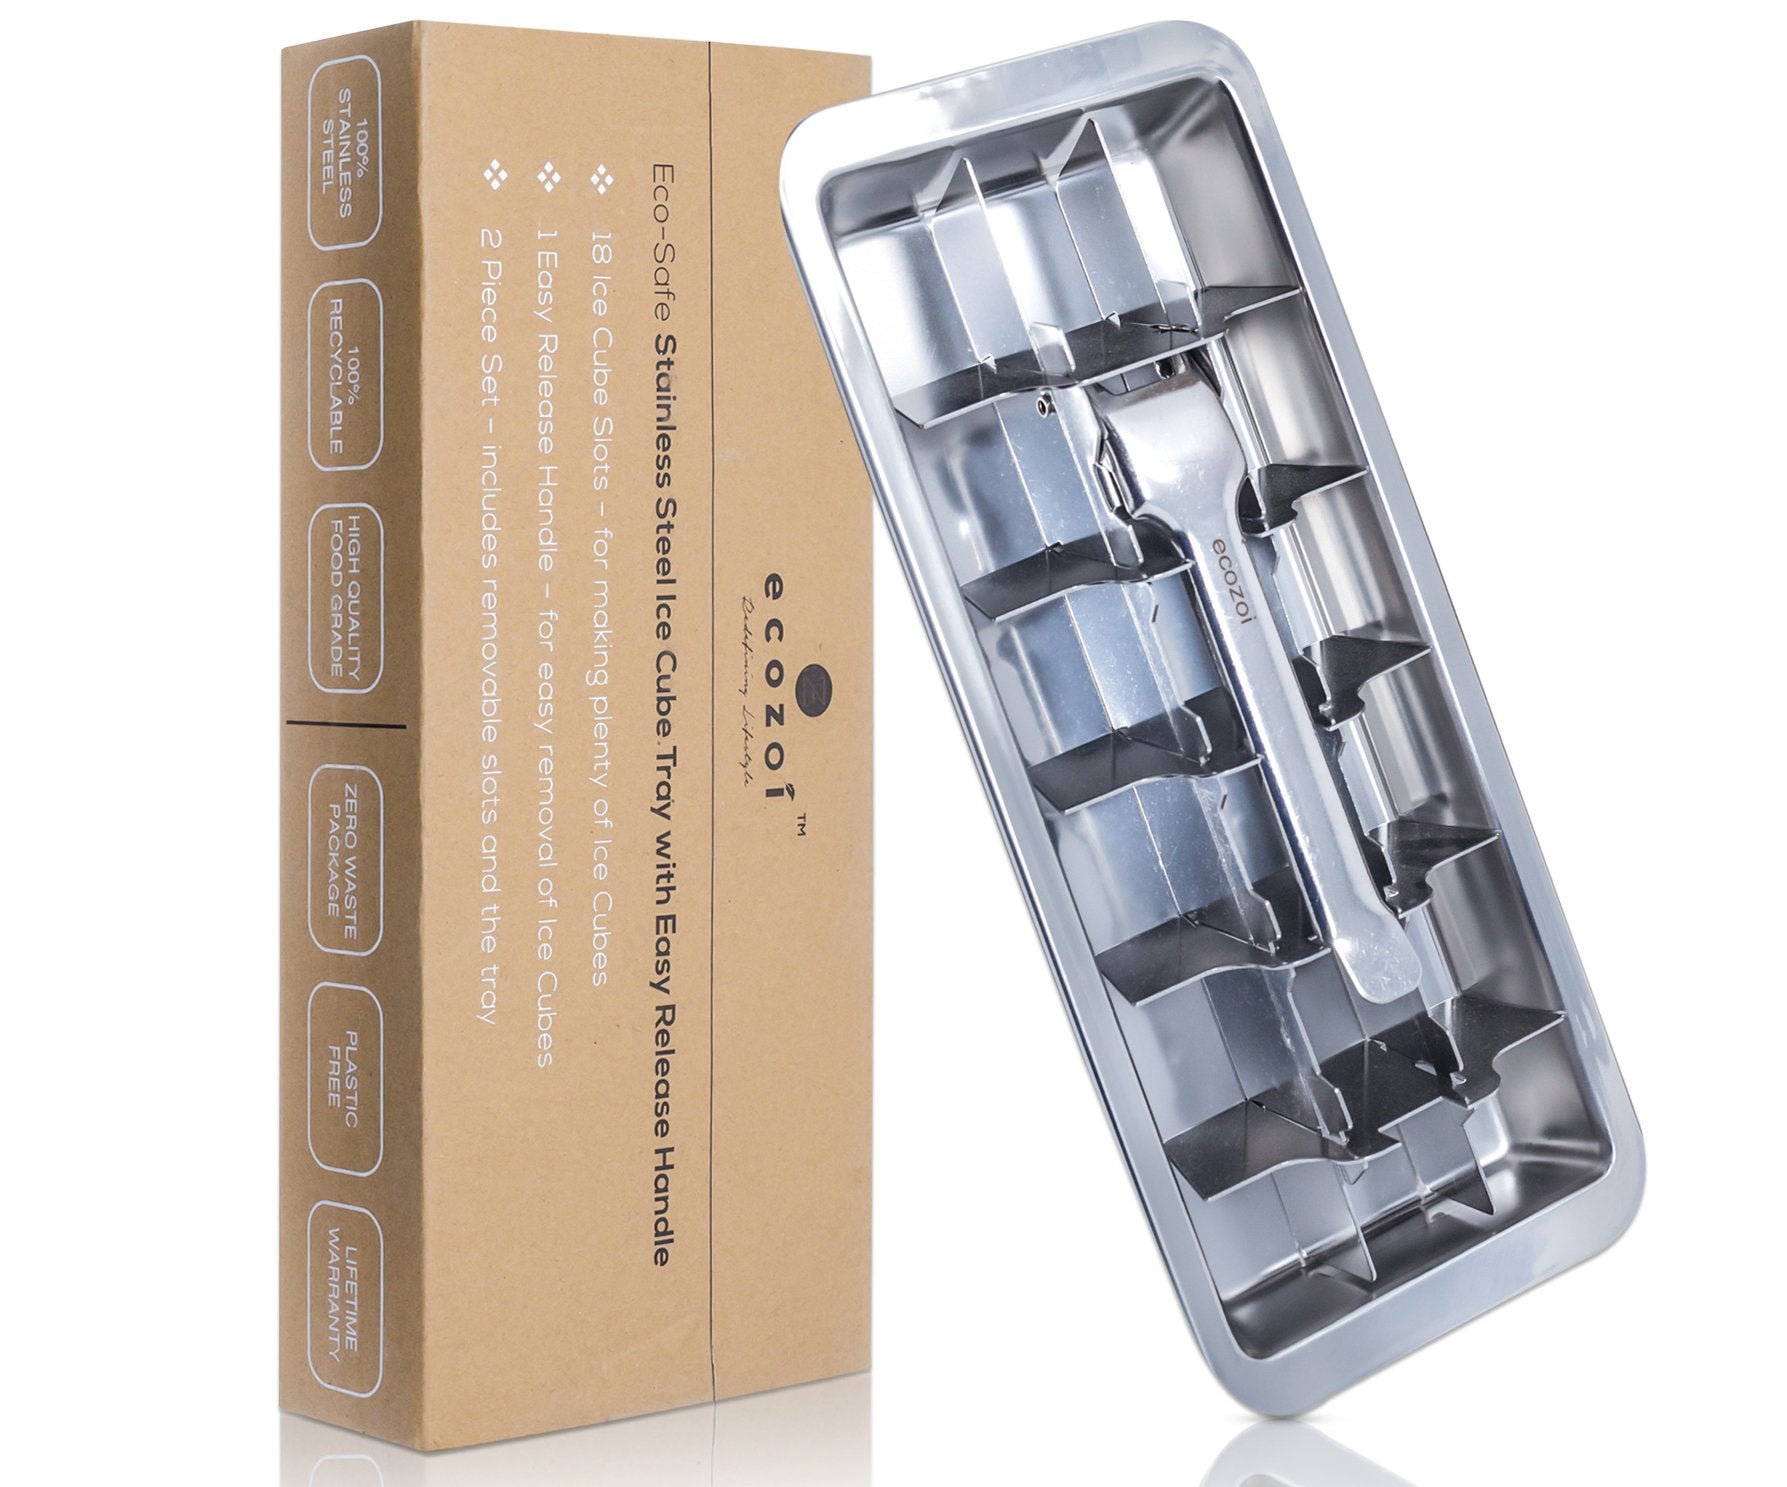 Onyx Stainless Steel Old-School Ice Cube Tray with Handle